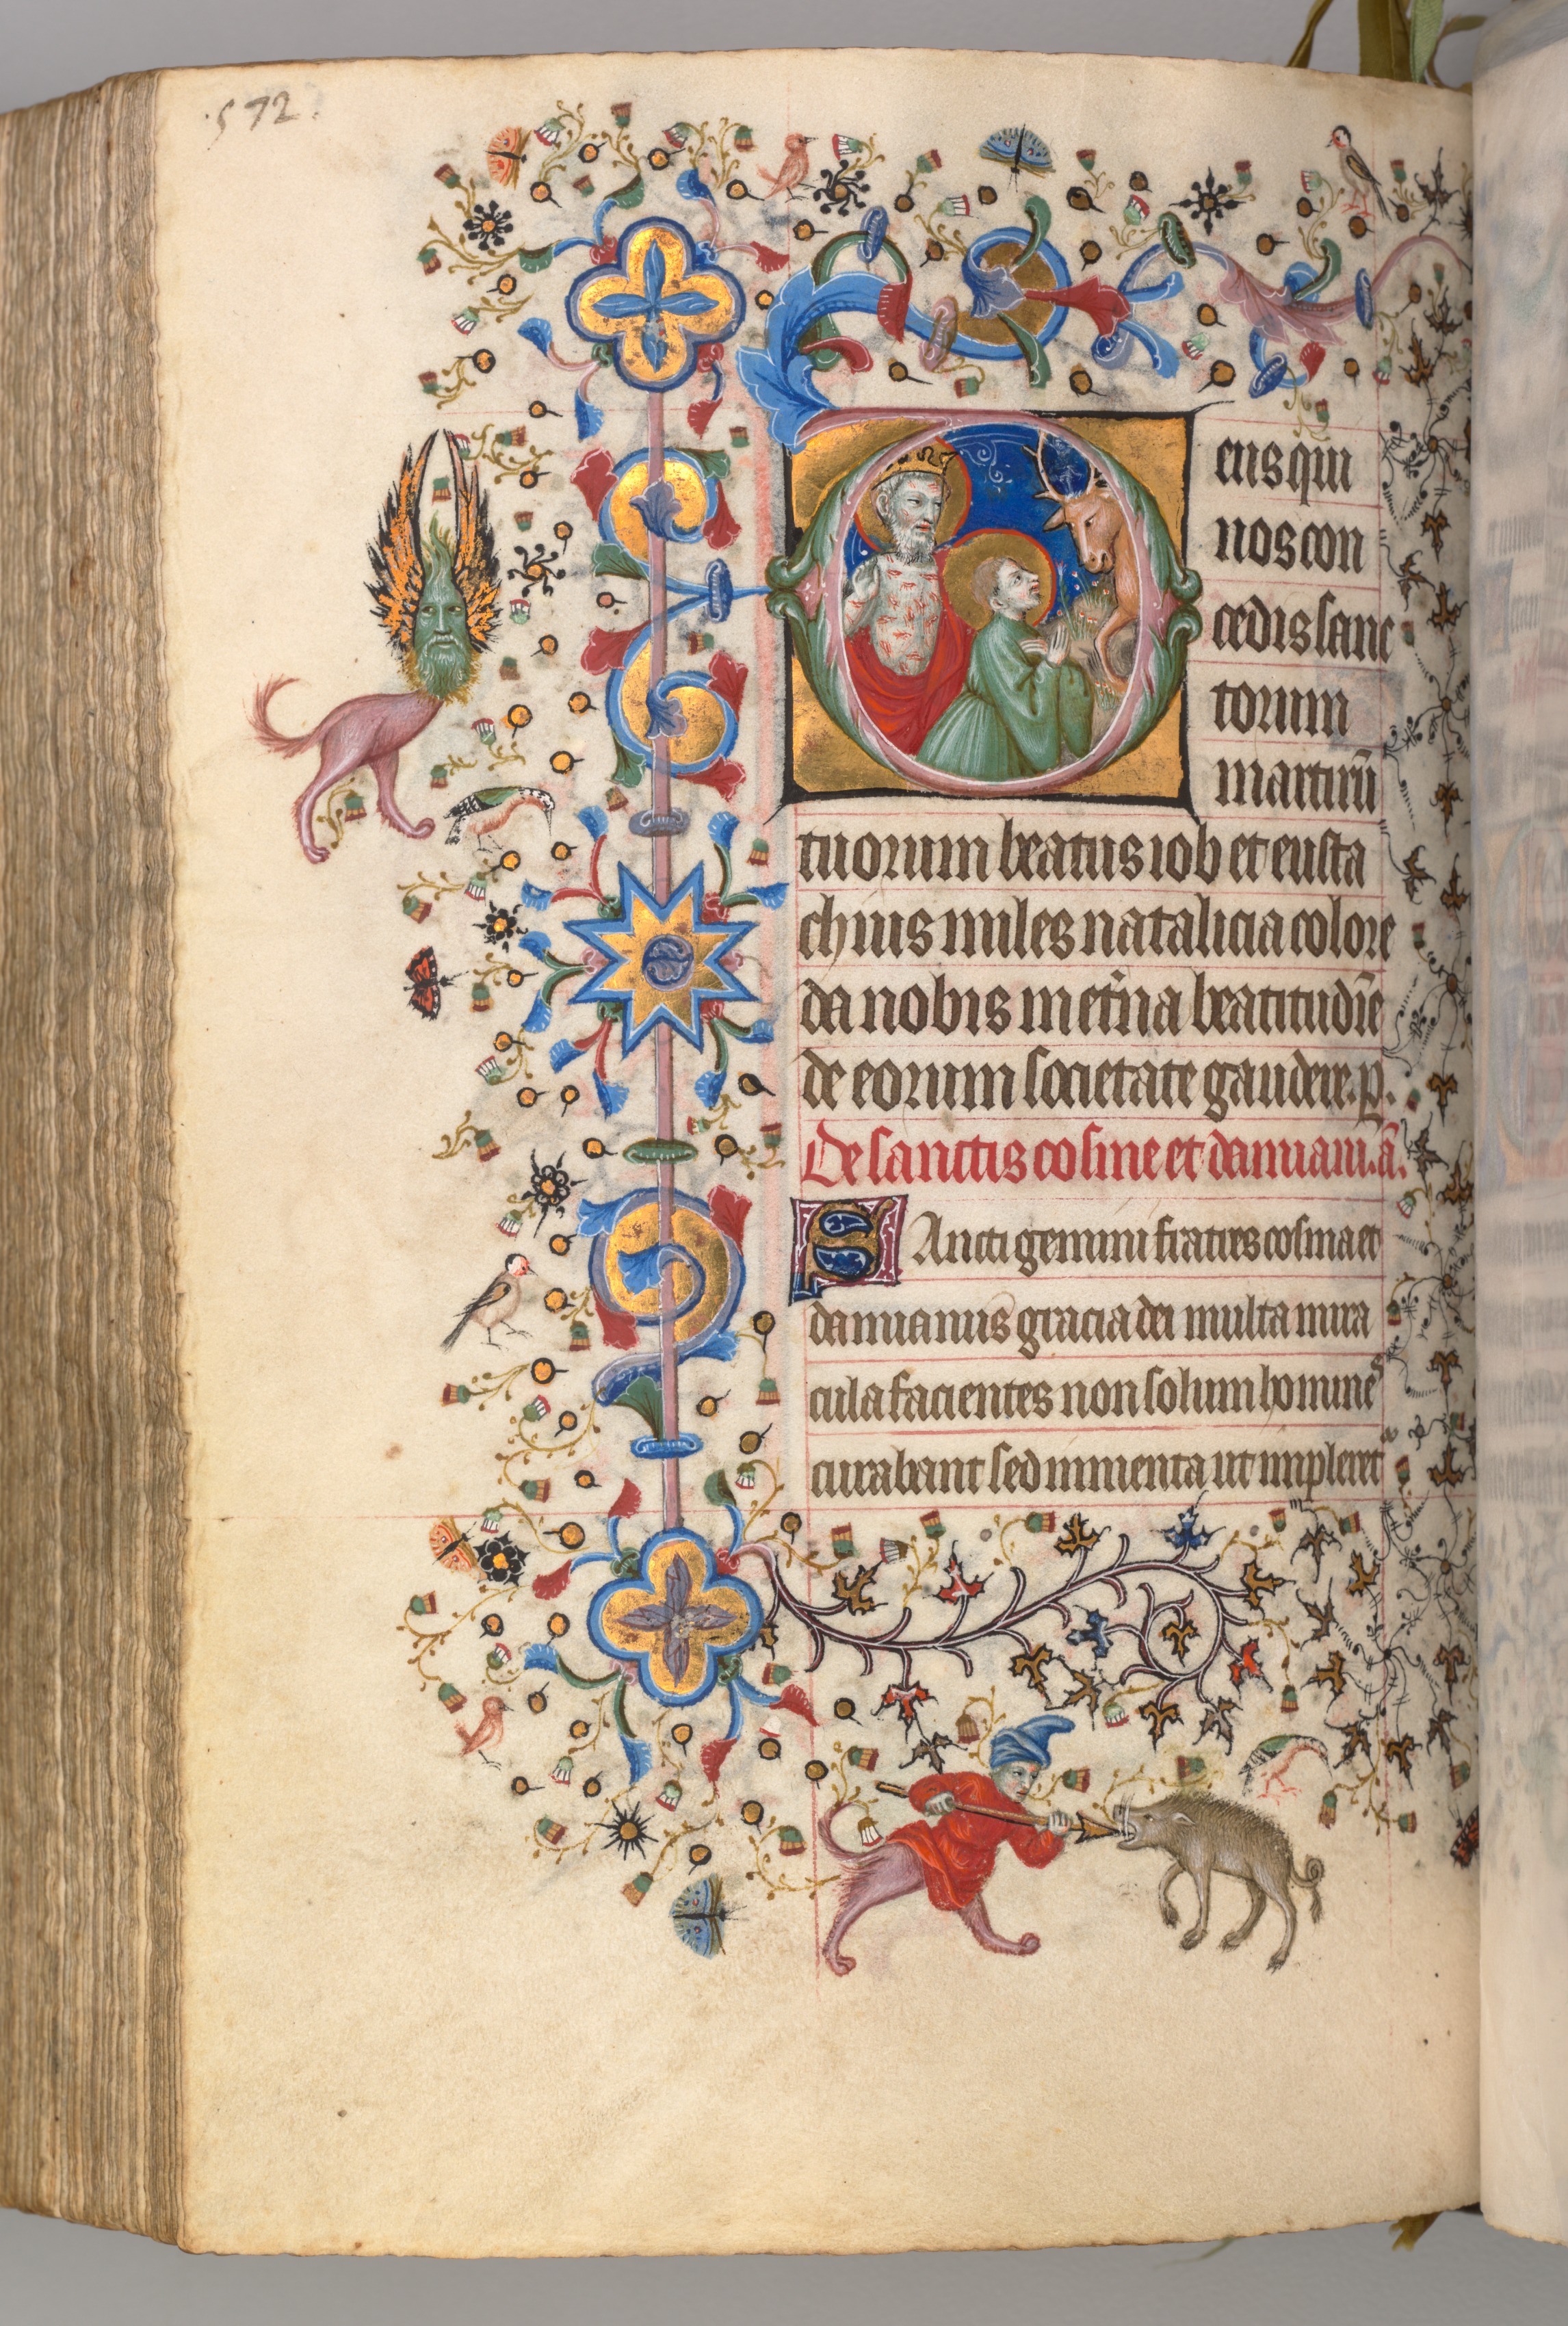 Hours of Charles the Noble, King of Navarre (1361-1425): fol. 280v, SS. Job and Eustace